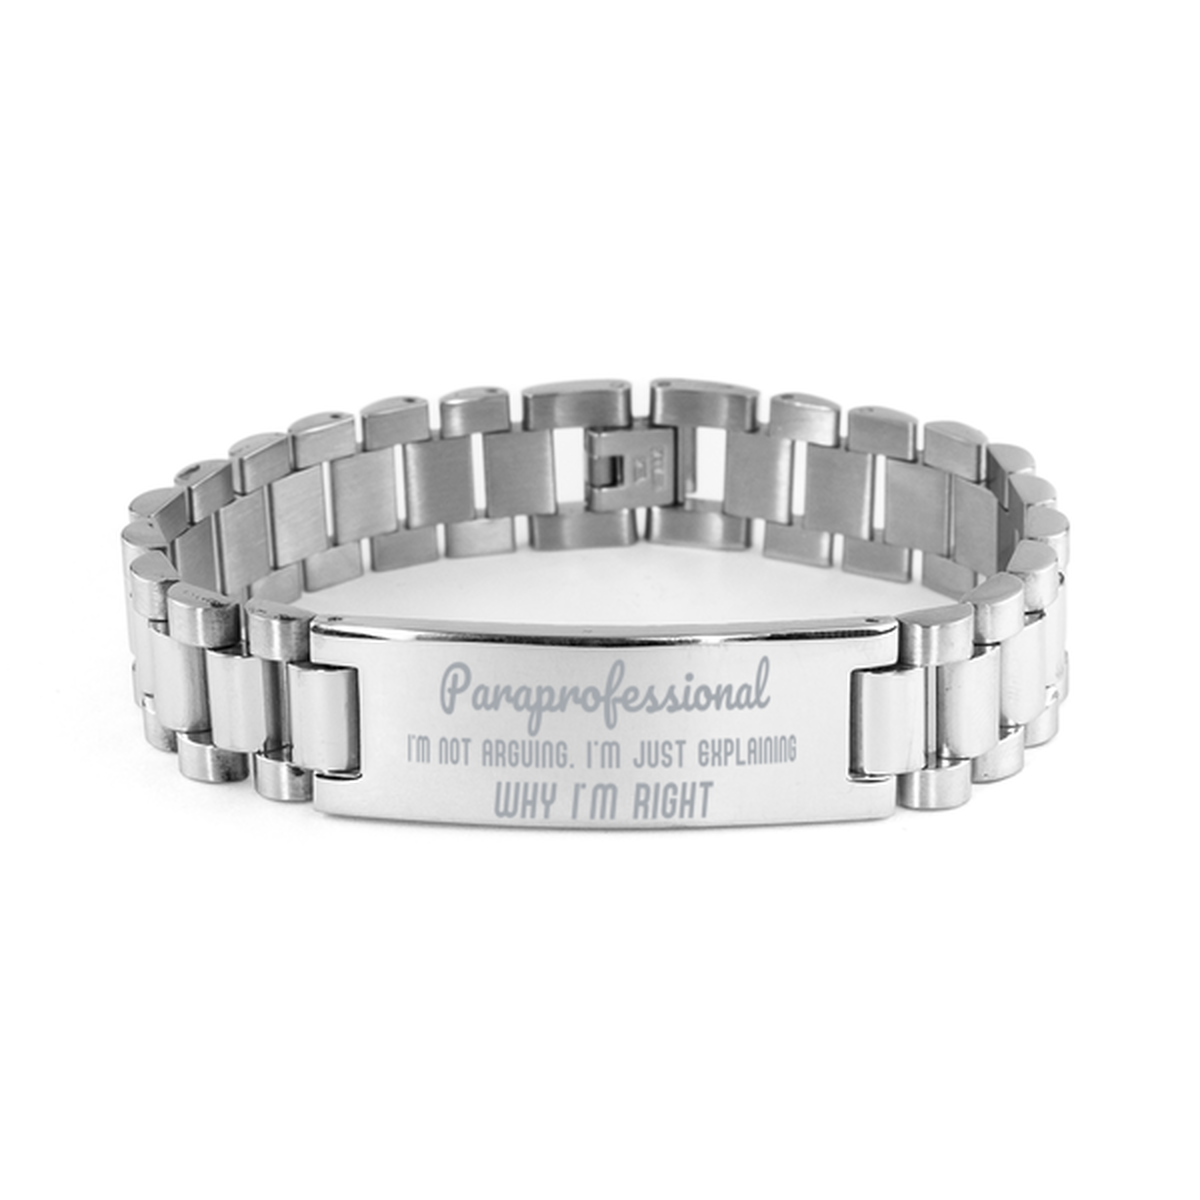 Paraprofessional I'm not Arguing. I'm Just Explaining Why I'm RIGHT Ladder Stainless Steel Bracelet, Graduation Birthday Christmas Paraprofessional Gifts For Paraprofessional Funny Saying Quote Present for Men Women Coworker